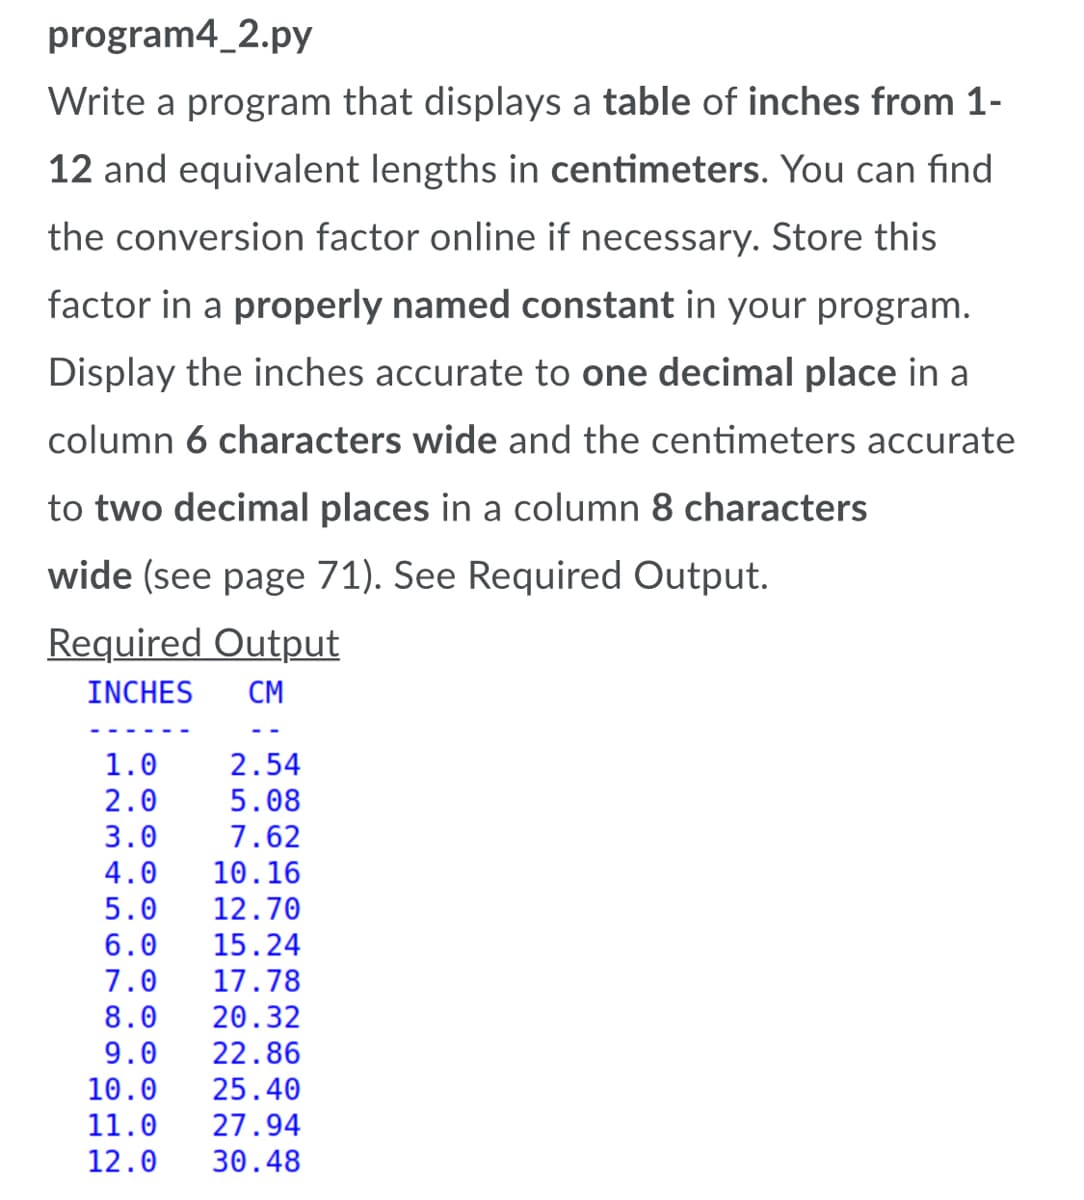 program4_2.py
Write a program that displays a table of inches from 1-
12 and equivalent lengths in centimeters. You can find
the conversion factor online if necessary. Store this
factor in a properly named constant in your program.
Display the inches accurate to one decimal place in a
column 6 characters wide and the centimeters accurate
to two decimal places in a column 8 characters
wide (see page 71). See Required Output.
Required Output
INCHES
CM
1.0
2.54
2.0
5.08
3.0
7.62
4.0
10.16
5.0
12.70
6.0
15.24
7.0
17.78
8.0
20.32
9.0
22.86
10.0
25.40
11.0
12.0
27.94
30.48
